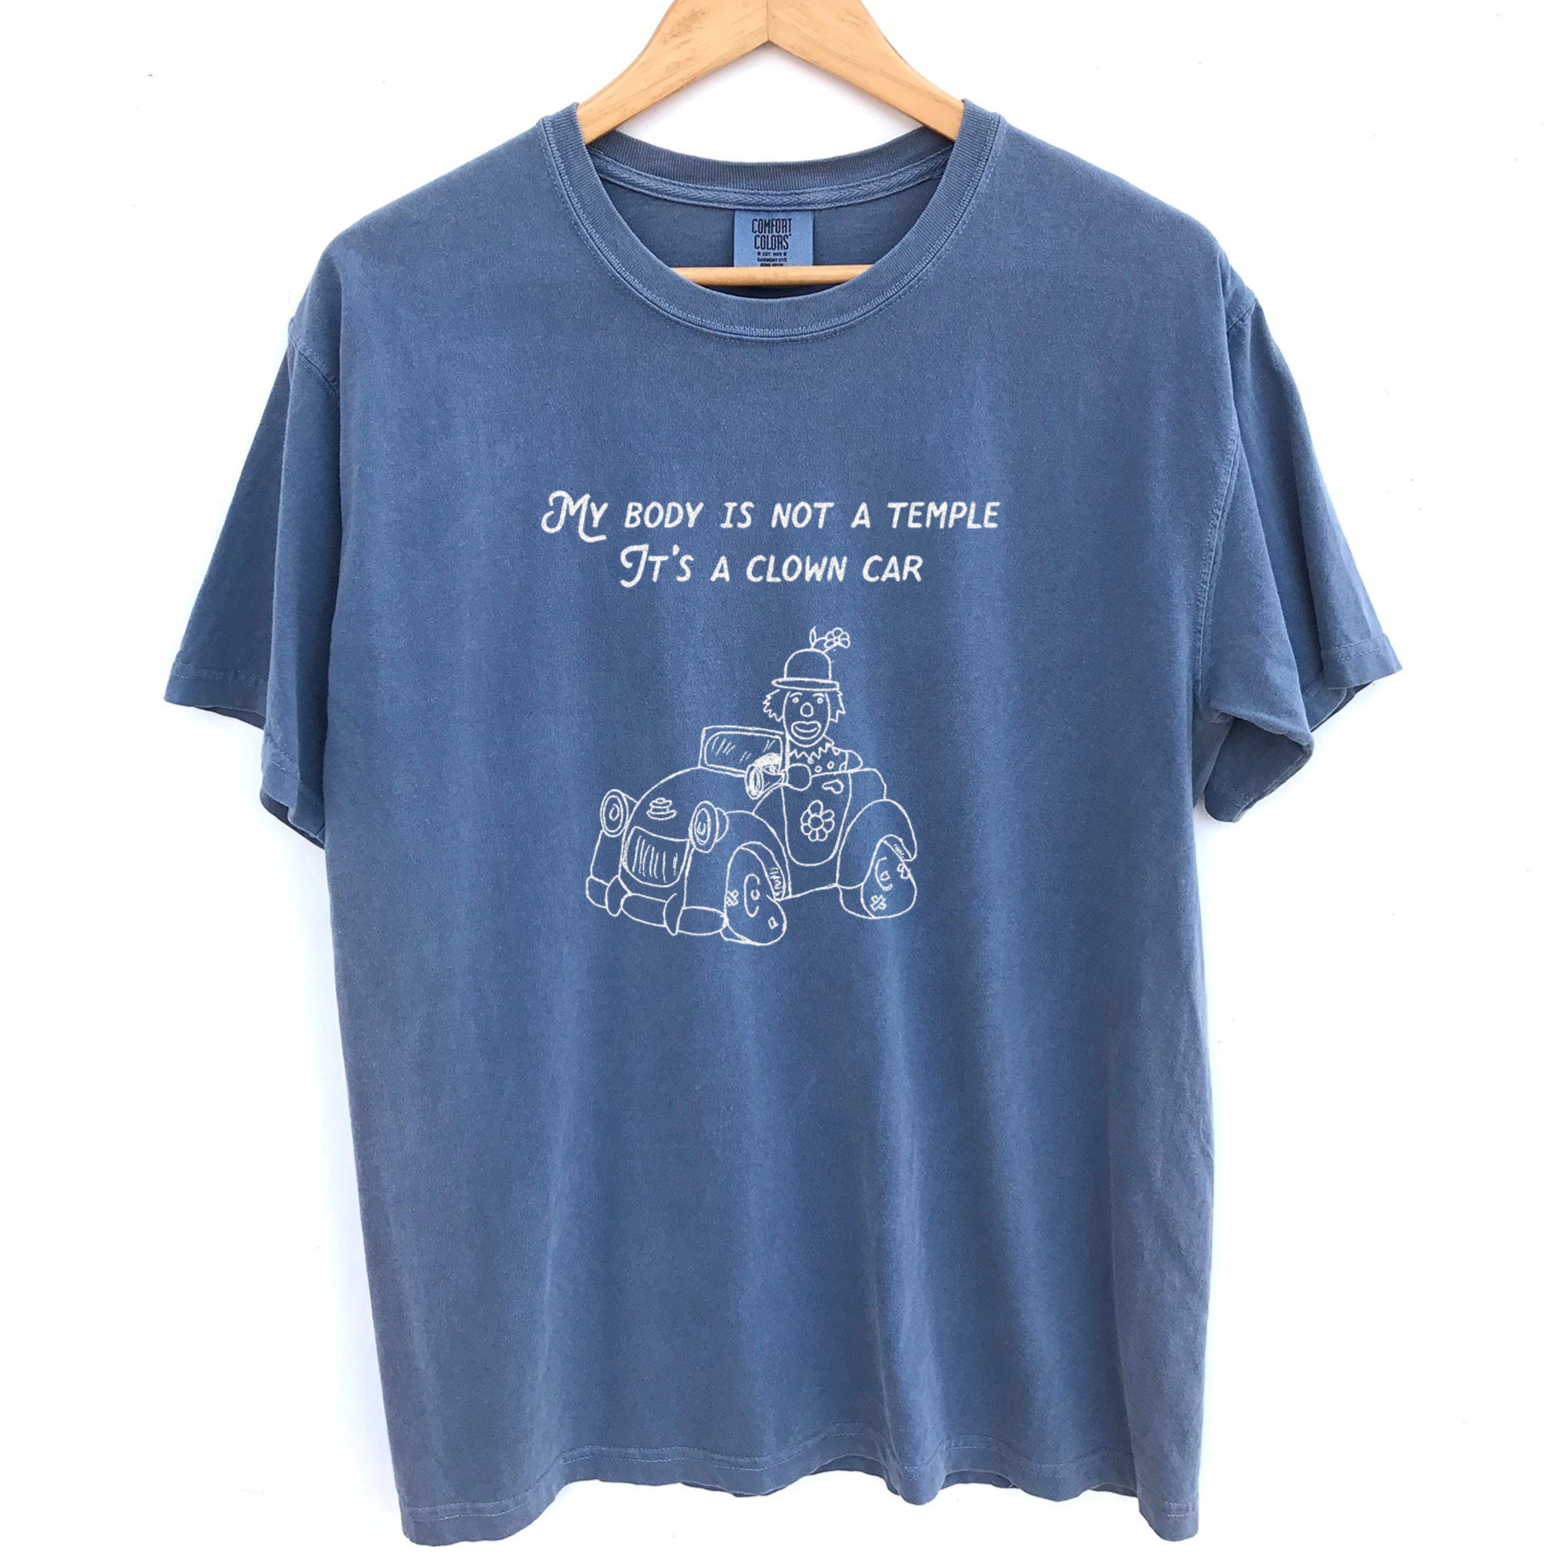 My Body Is Not A Temple, It's a Clown Car Garment-Dyed T-shirt